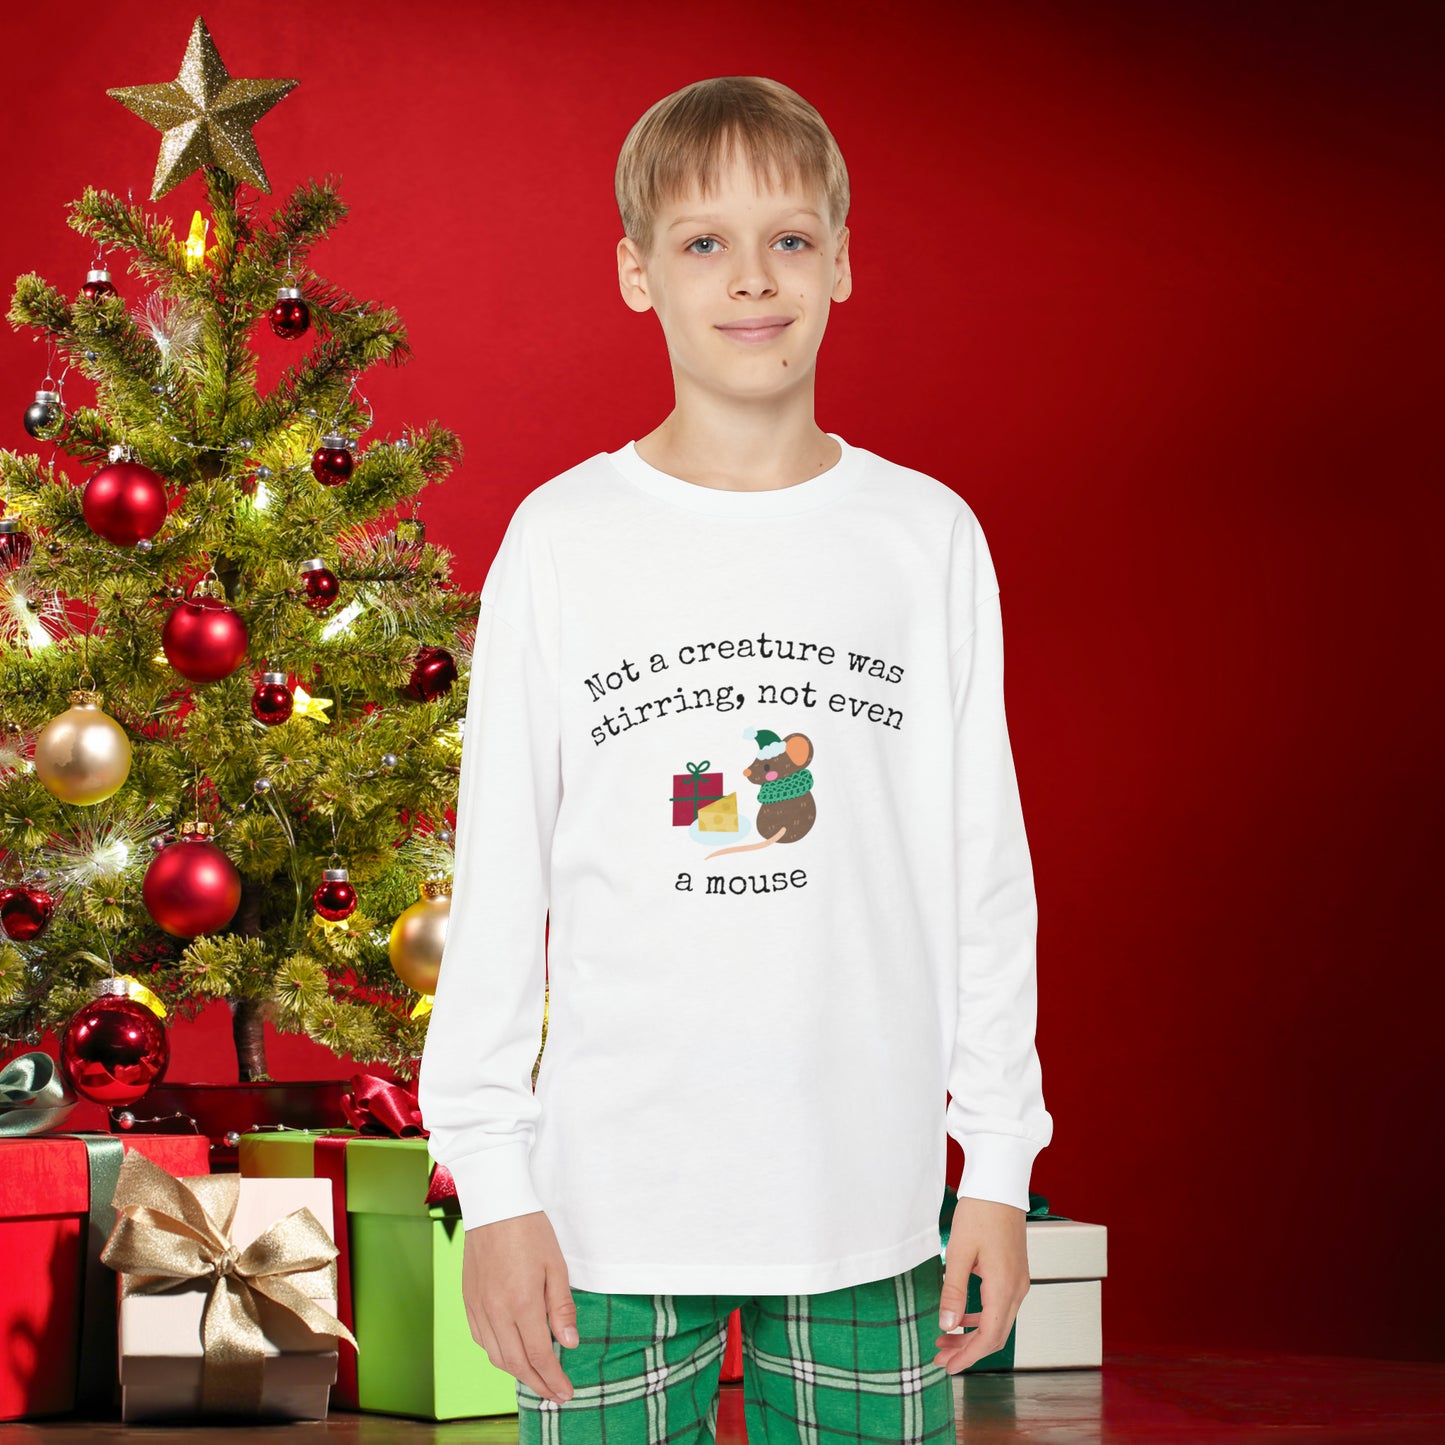 Youth Long Sleeve Holiday Outfit Set, Family Christmas Pajama Set, "Not a creature was stirring, not even a mouse" Shirt and Flannel Pant Set